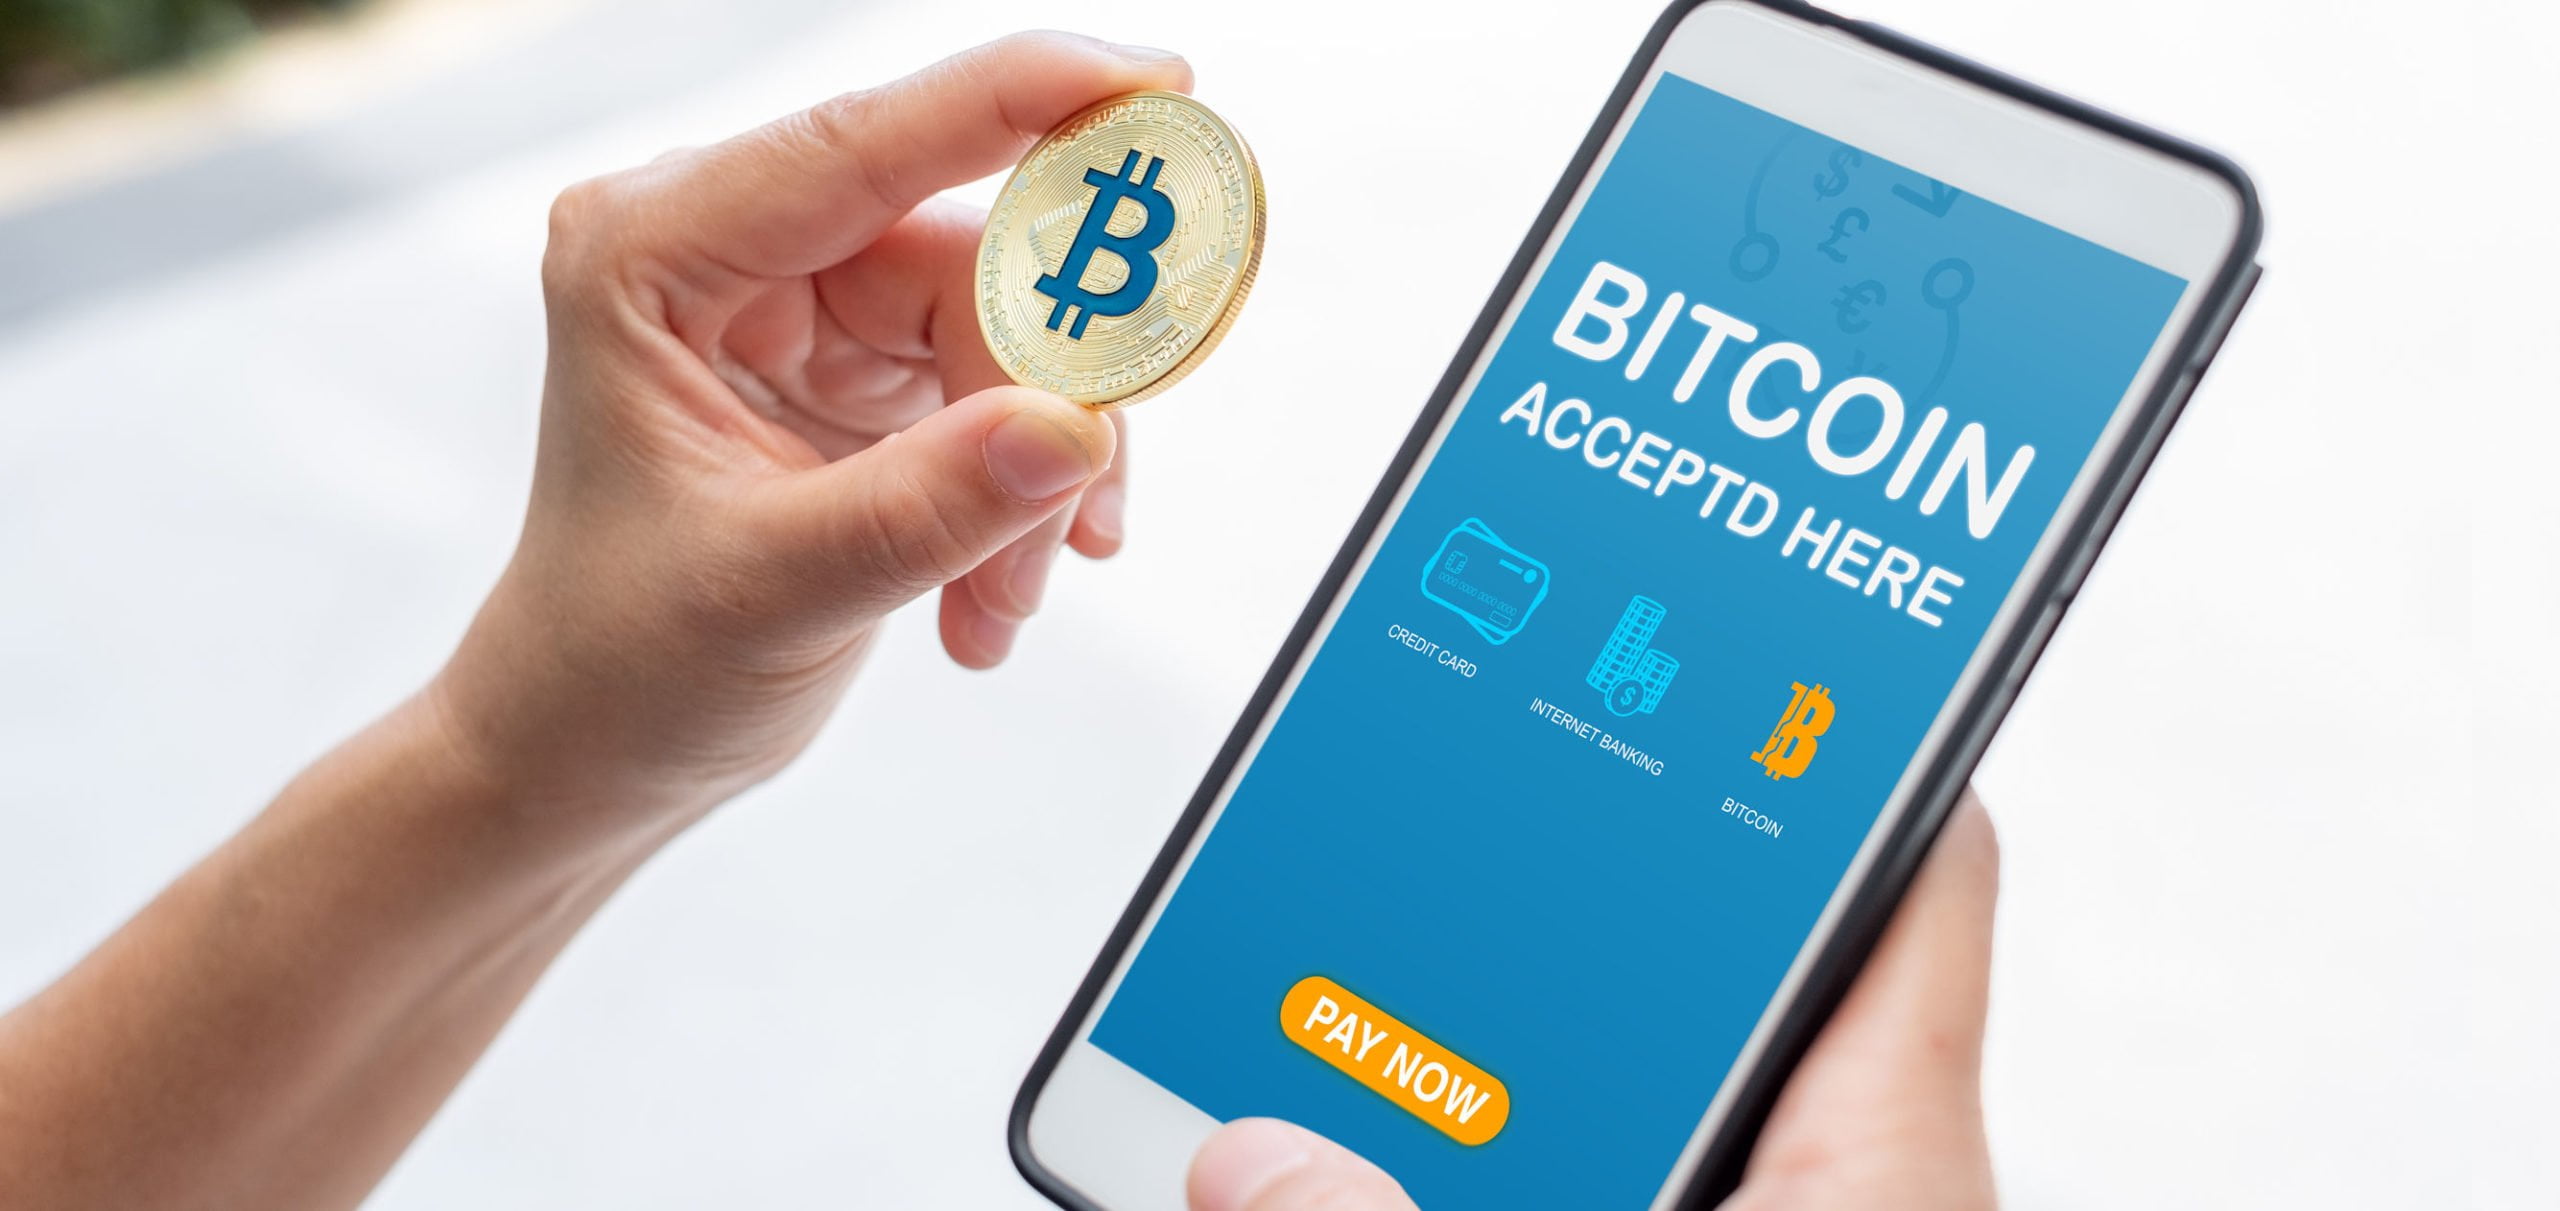 Giant telephone operator Telefonica accepts Bitcoin 4